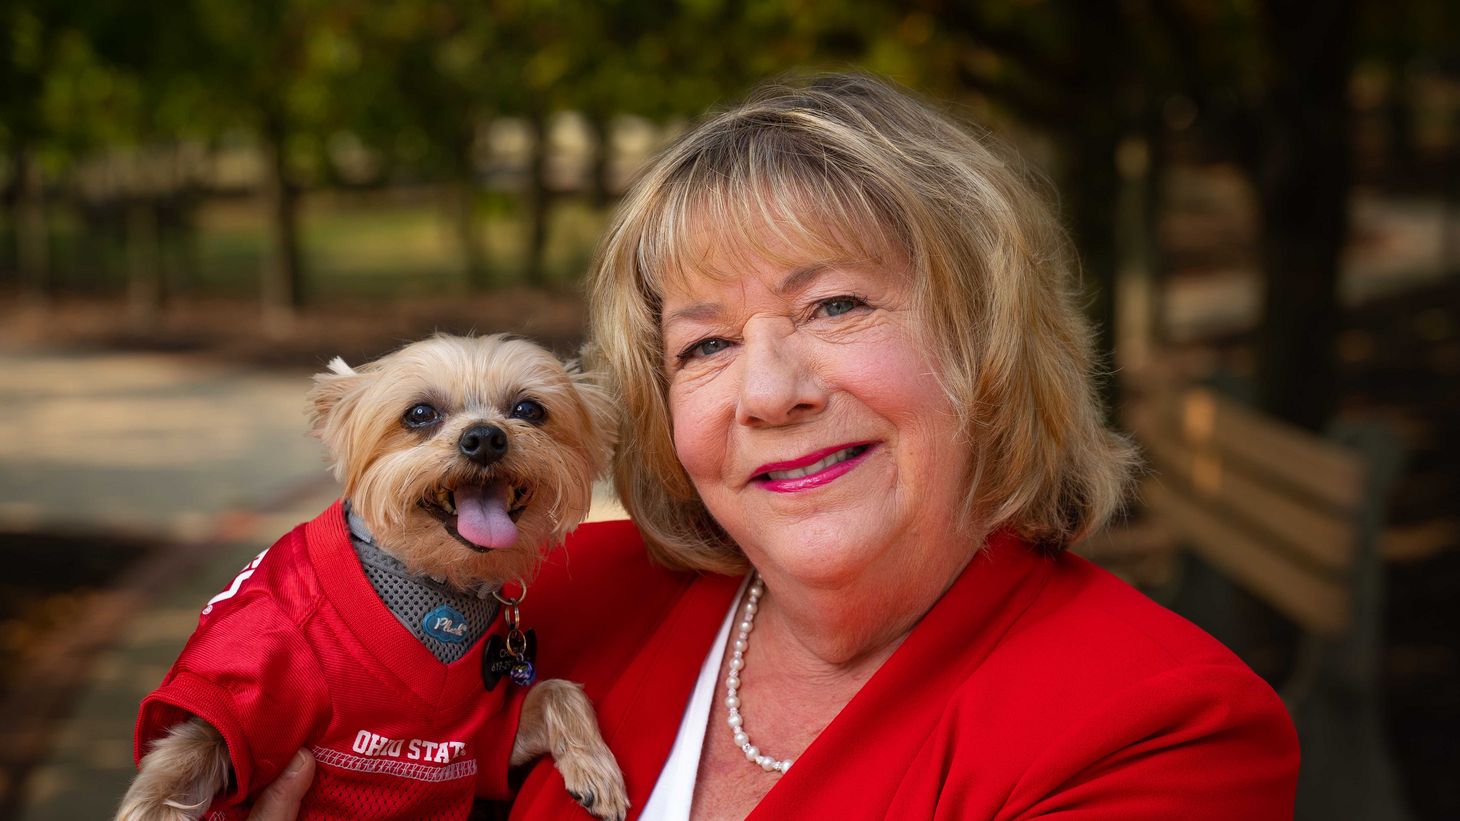 Linda Connor with her dog in an Ohio State jersey